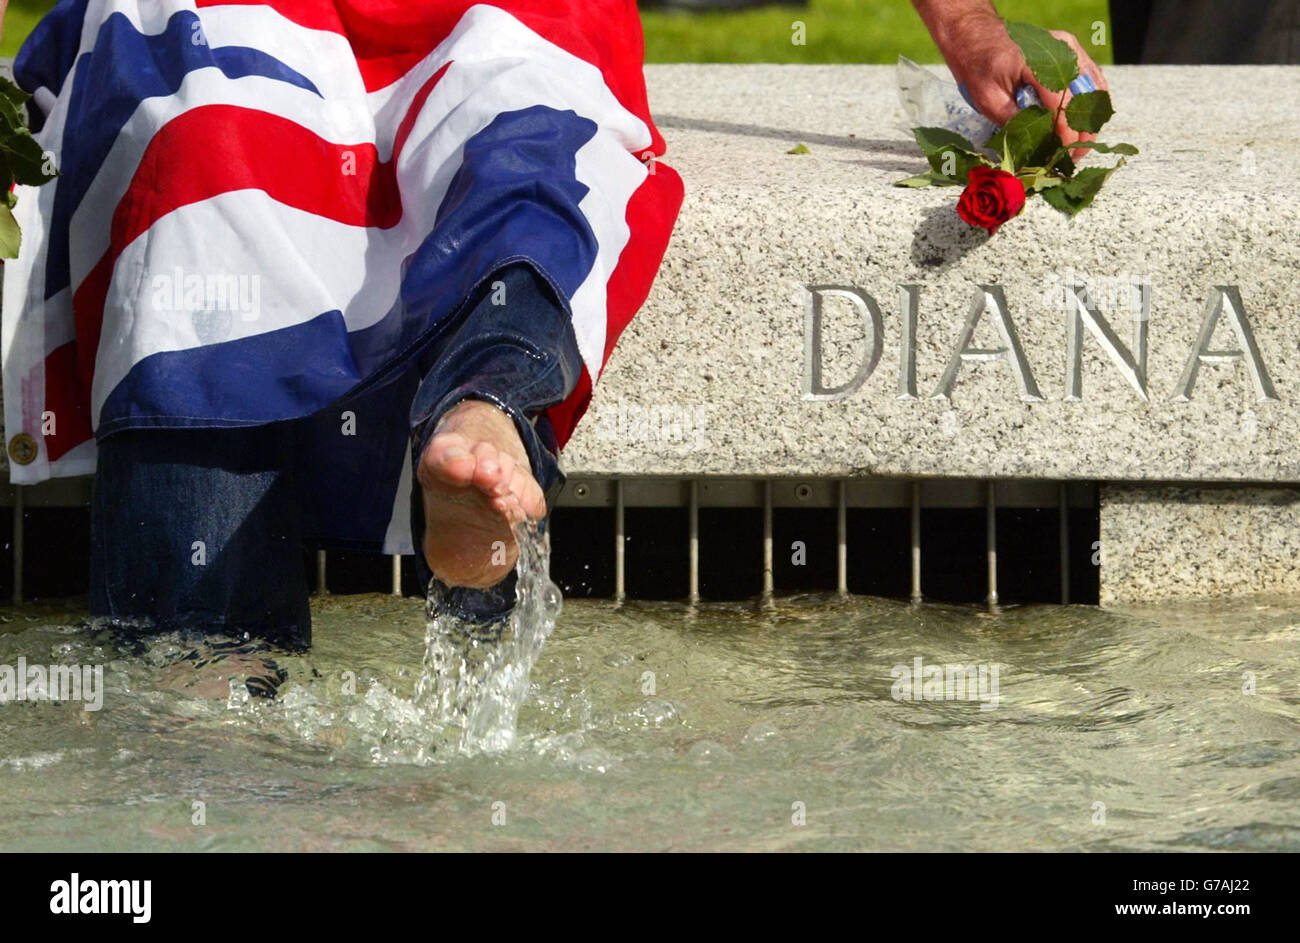 John Loughrey from Wandsworth,London, splashes around in the Diana Fountain as it reopens to the public after safety modifications. Stock Photo